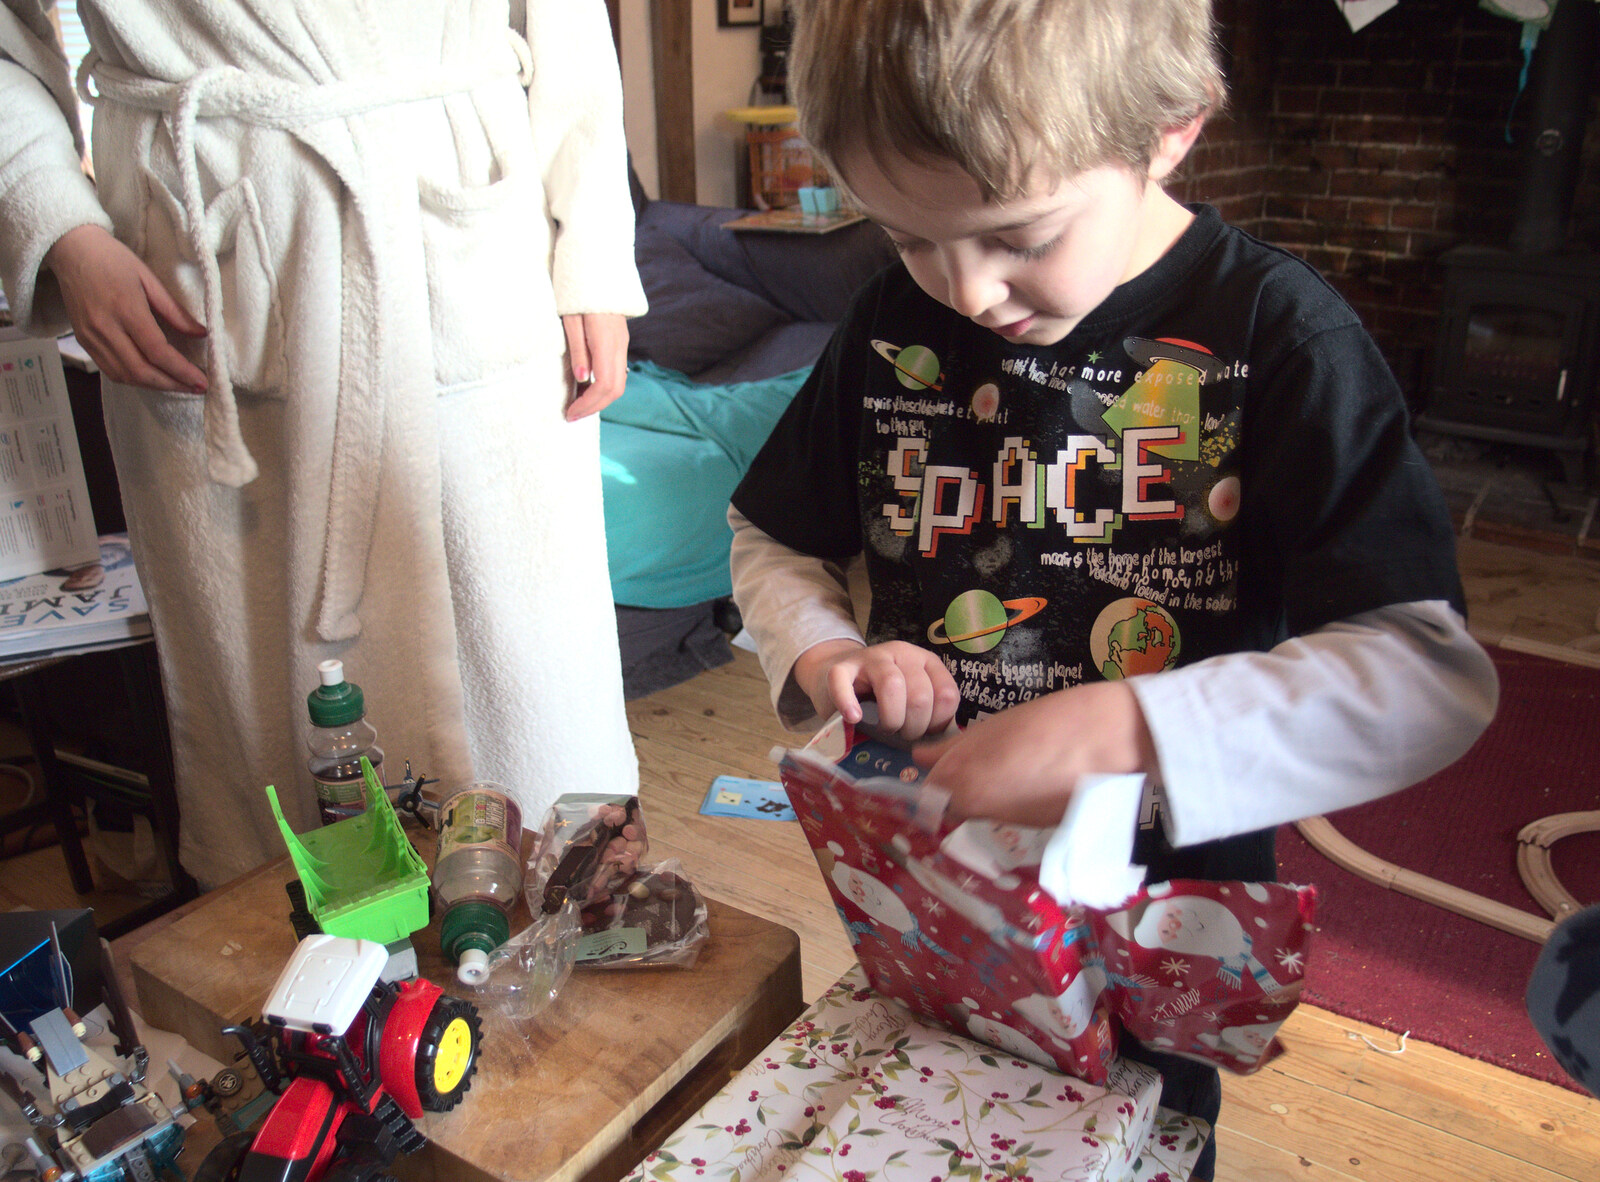 Fred tears into a present from Christmas Day at the Swan Inn, Brome, Suffolk - 25th December 2014